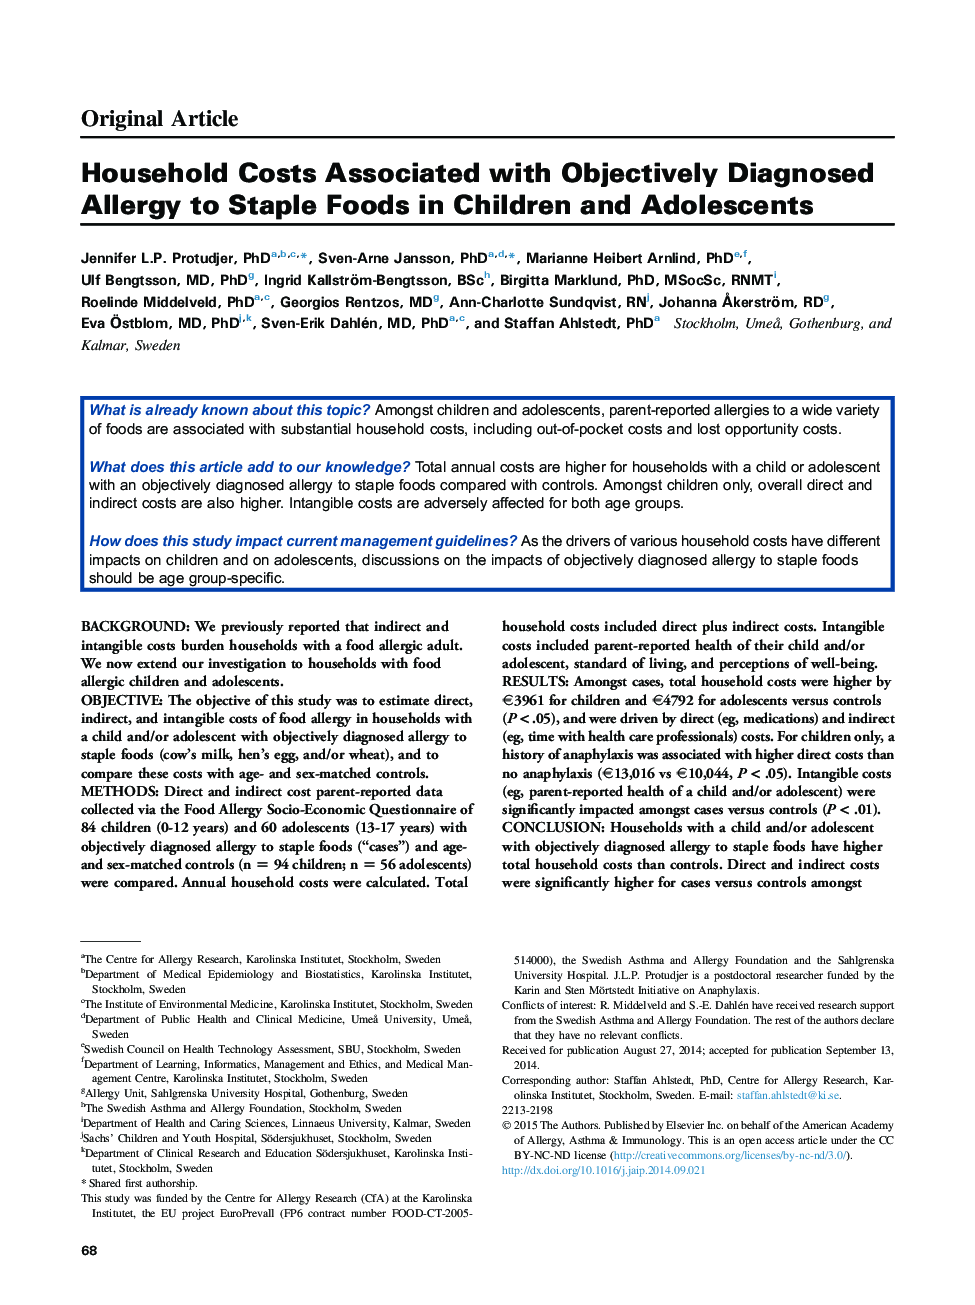 Household Costs Associated with Objectively Diagnosed Allergy to Staple Foods in Children and Adolescents